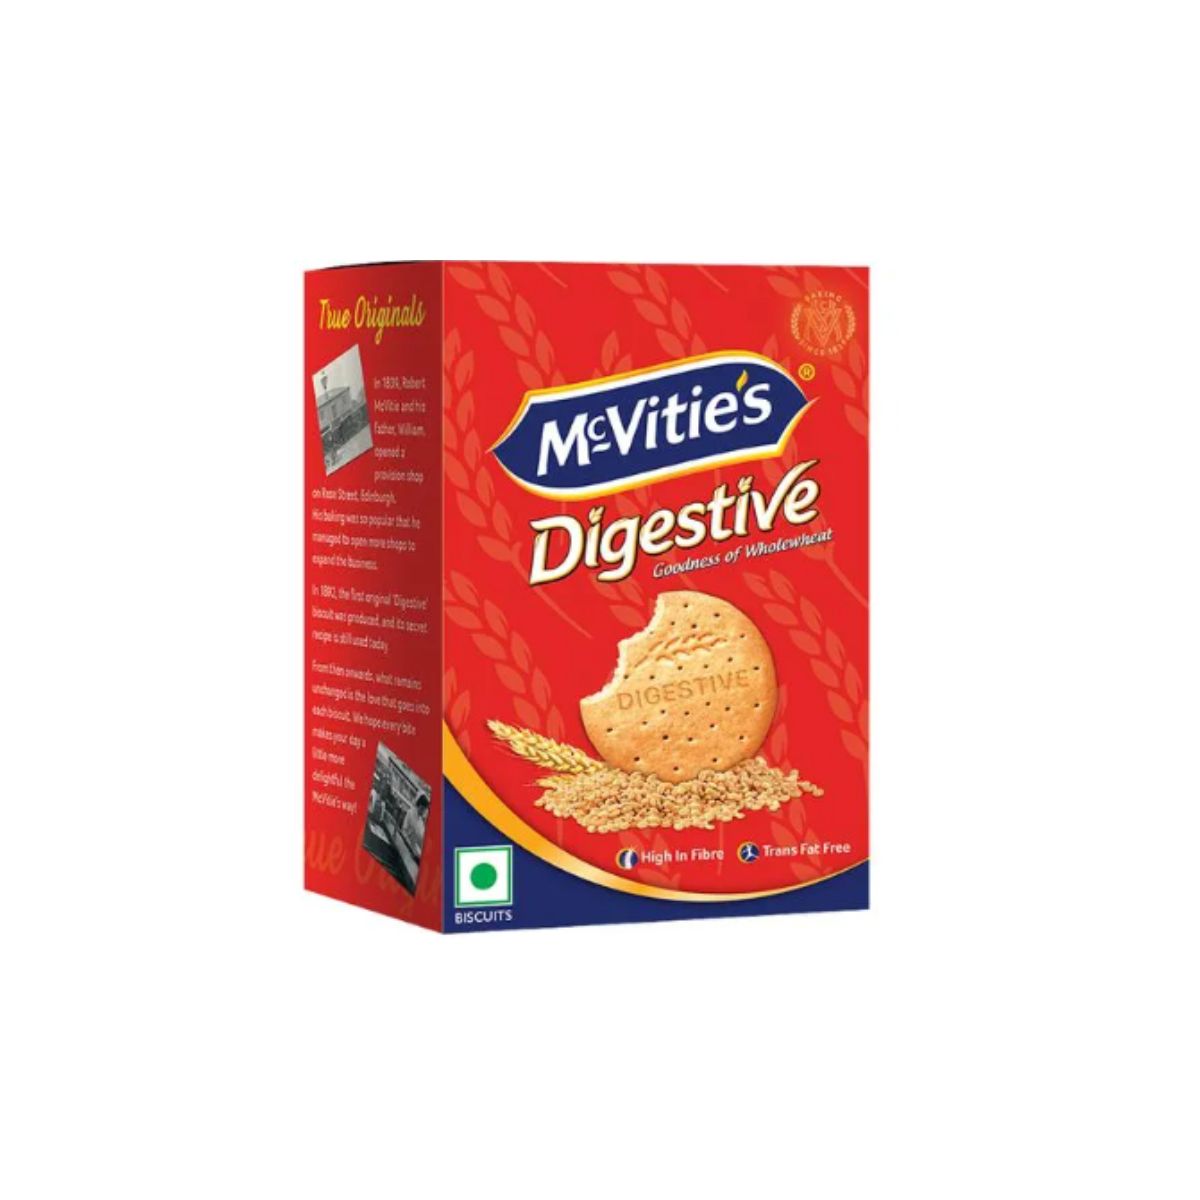 McVitie's Digestive Biscuit - Goodness 0f WholeWheat - 253.3g